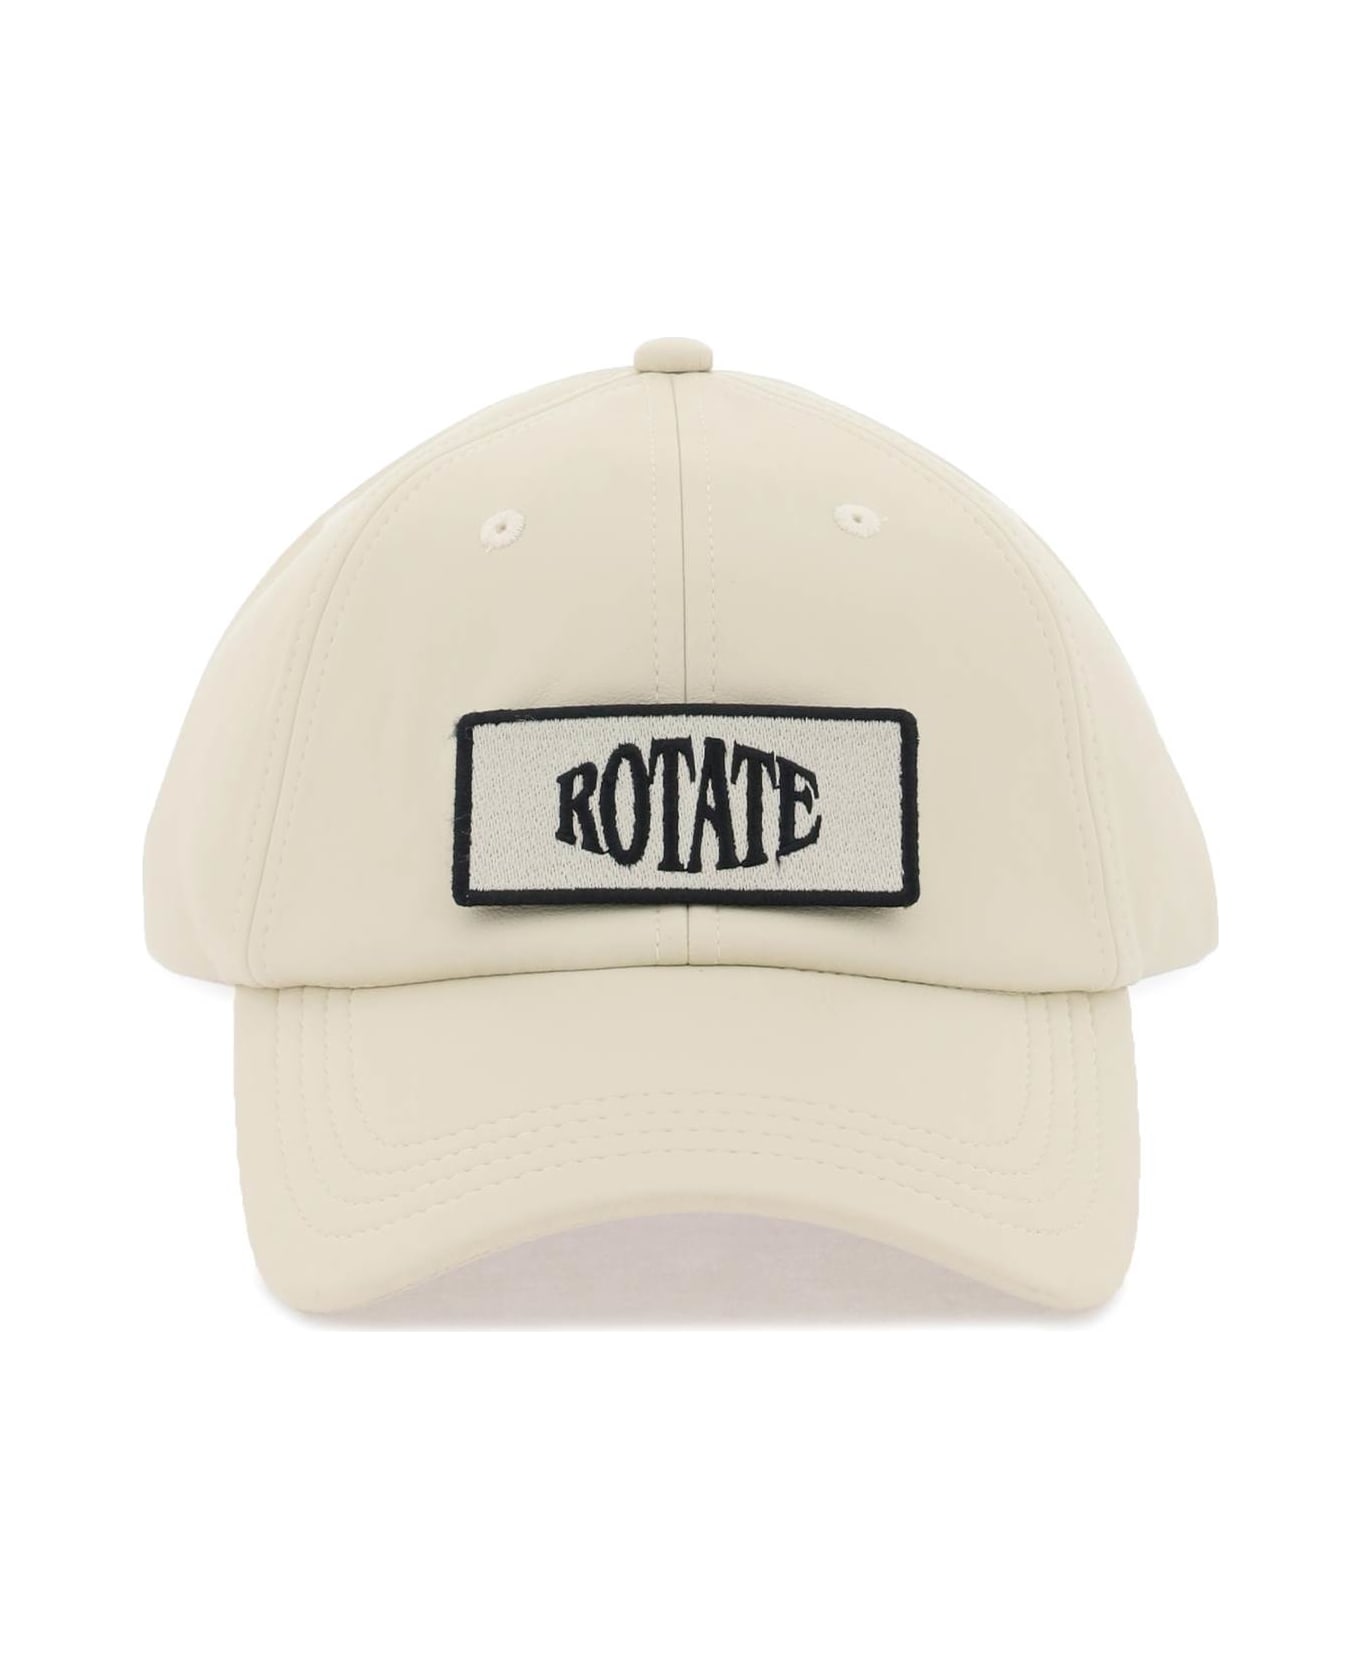 Rotate by Birger Christensen Baseball Man Cap With Logo Patch - OYSTER GRAY (Beige)